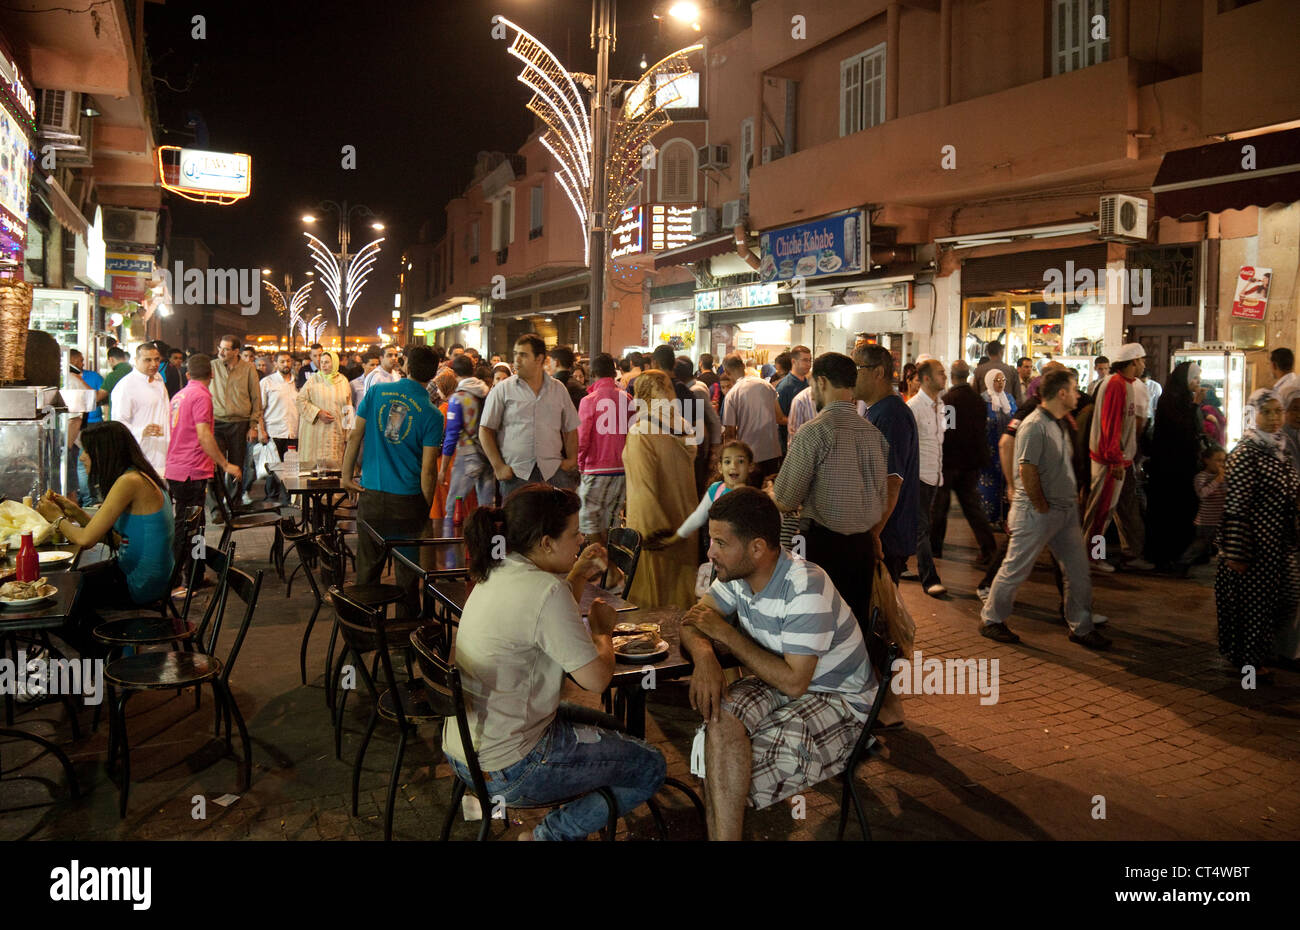 Crowded street scene at night, Marrakech, Morocco, Africa Stock Photo